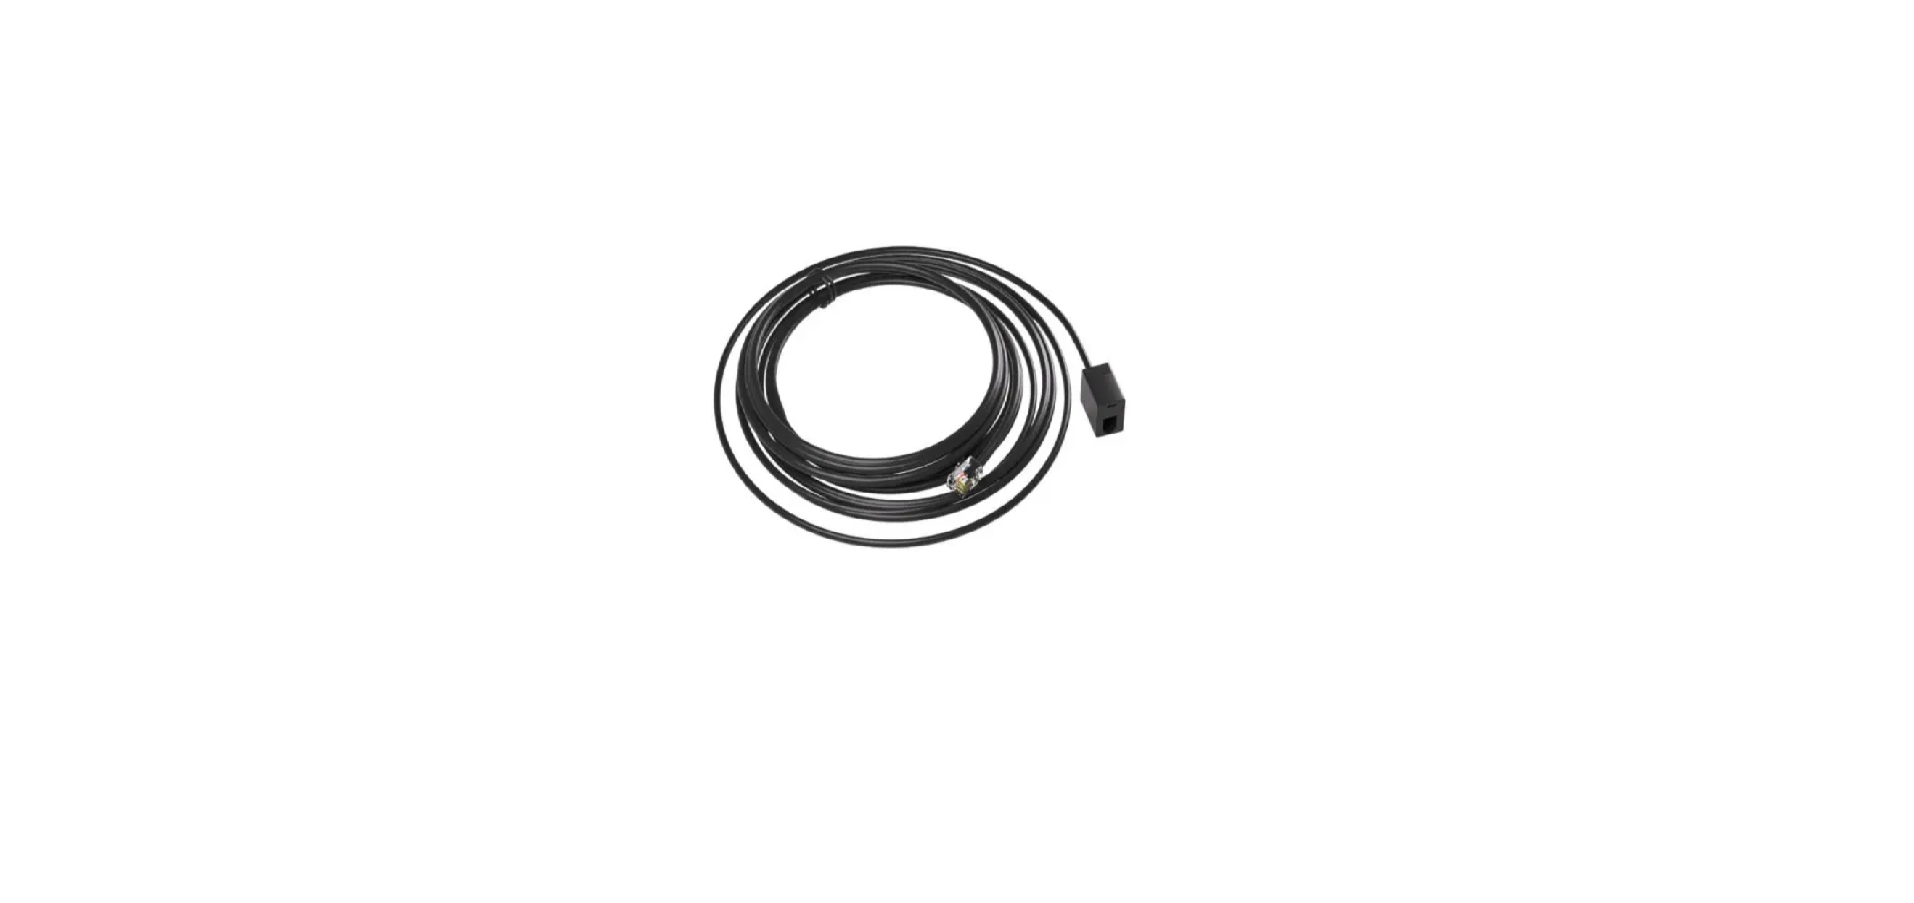 Sonoff-RL560-Sensor-Extension-Cable-FEATURE